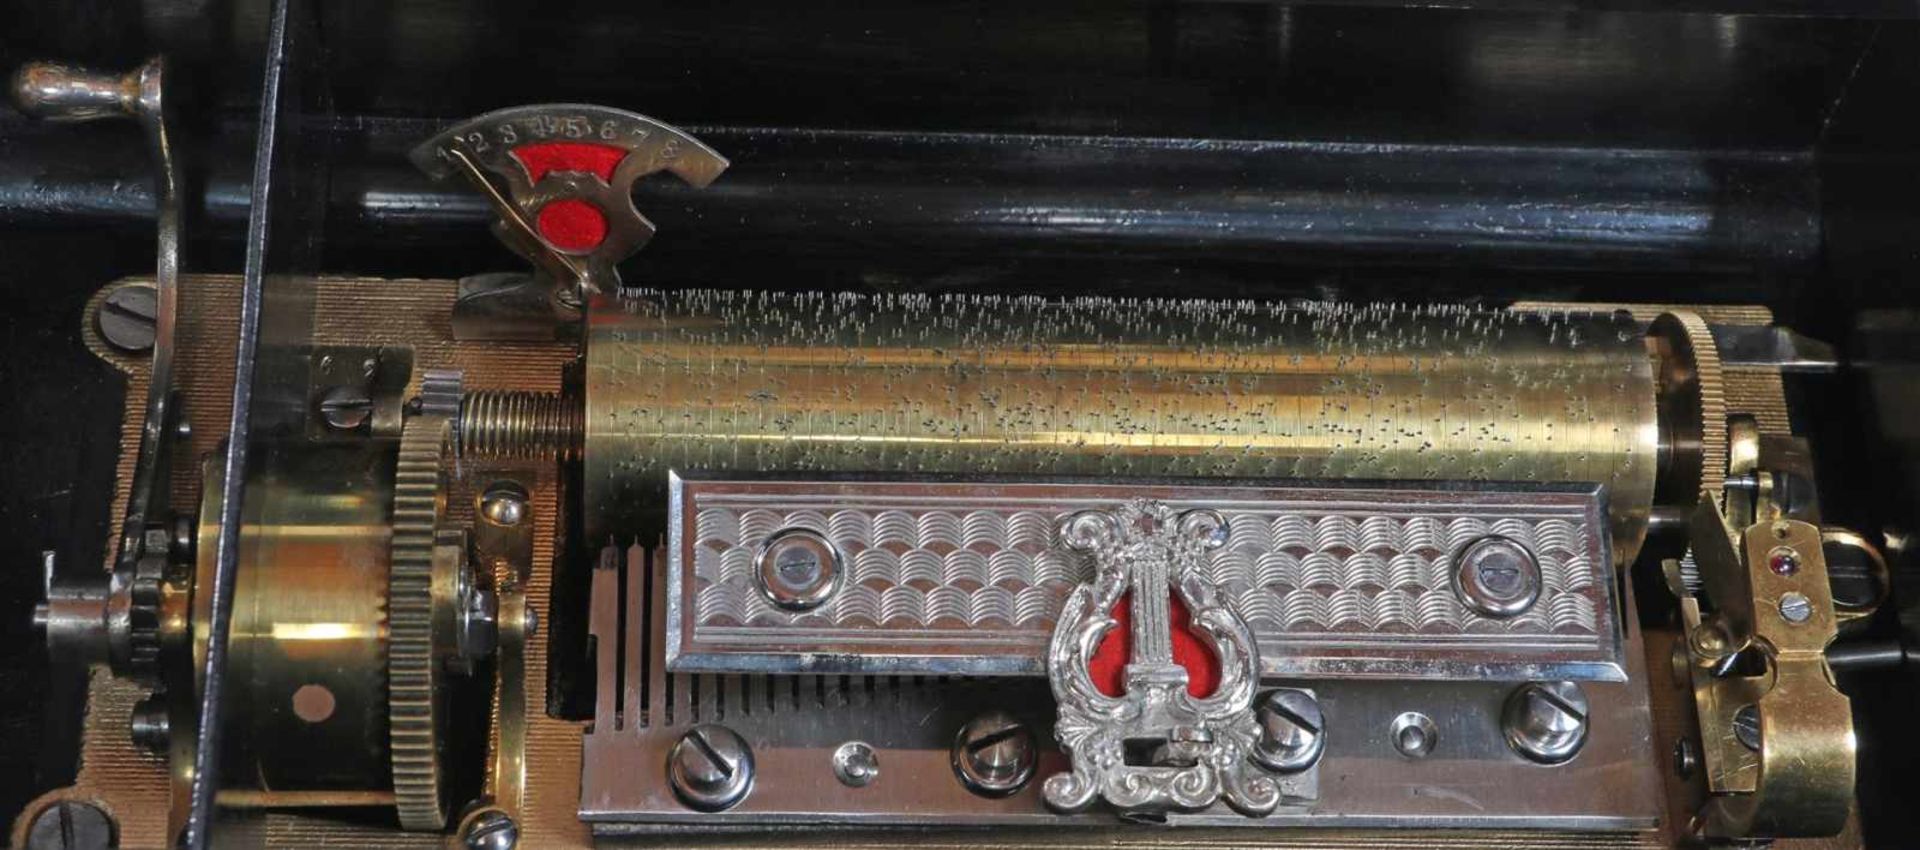 Very nice 19th century music box with roll with 8 melodies. Cabinet with & nbsp; inlaid piping & - Image 4 of 4